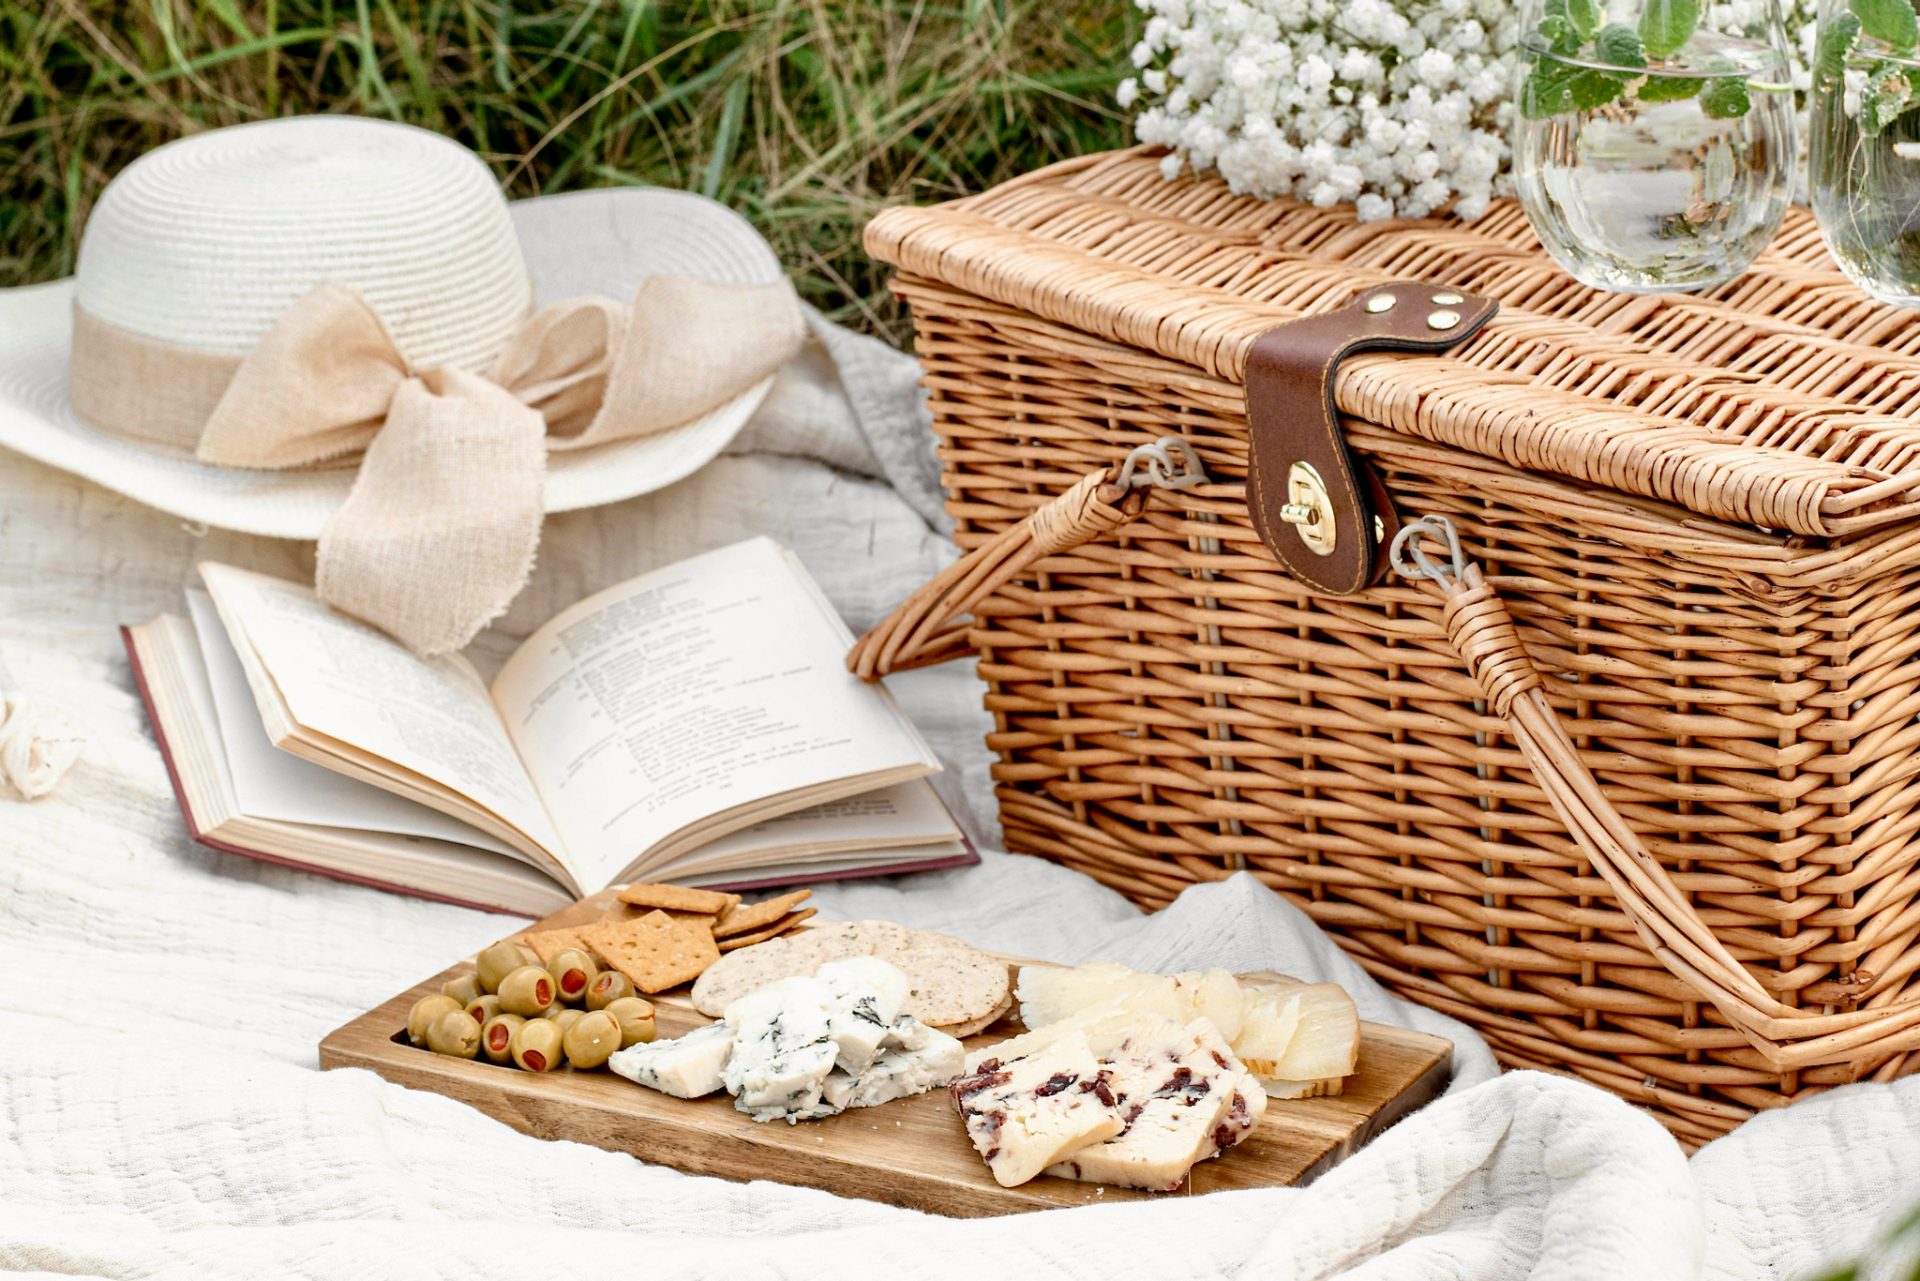 Close-up of a picnic blanket with wicker basket, hat and food